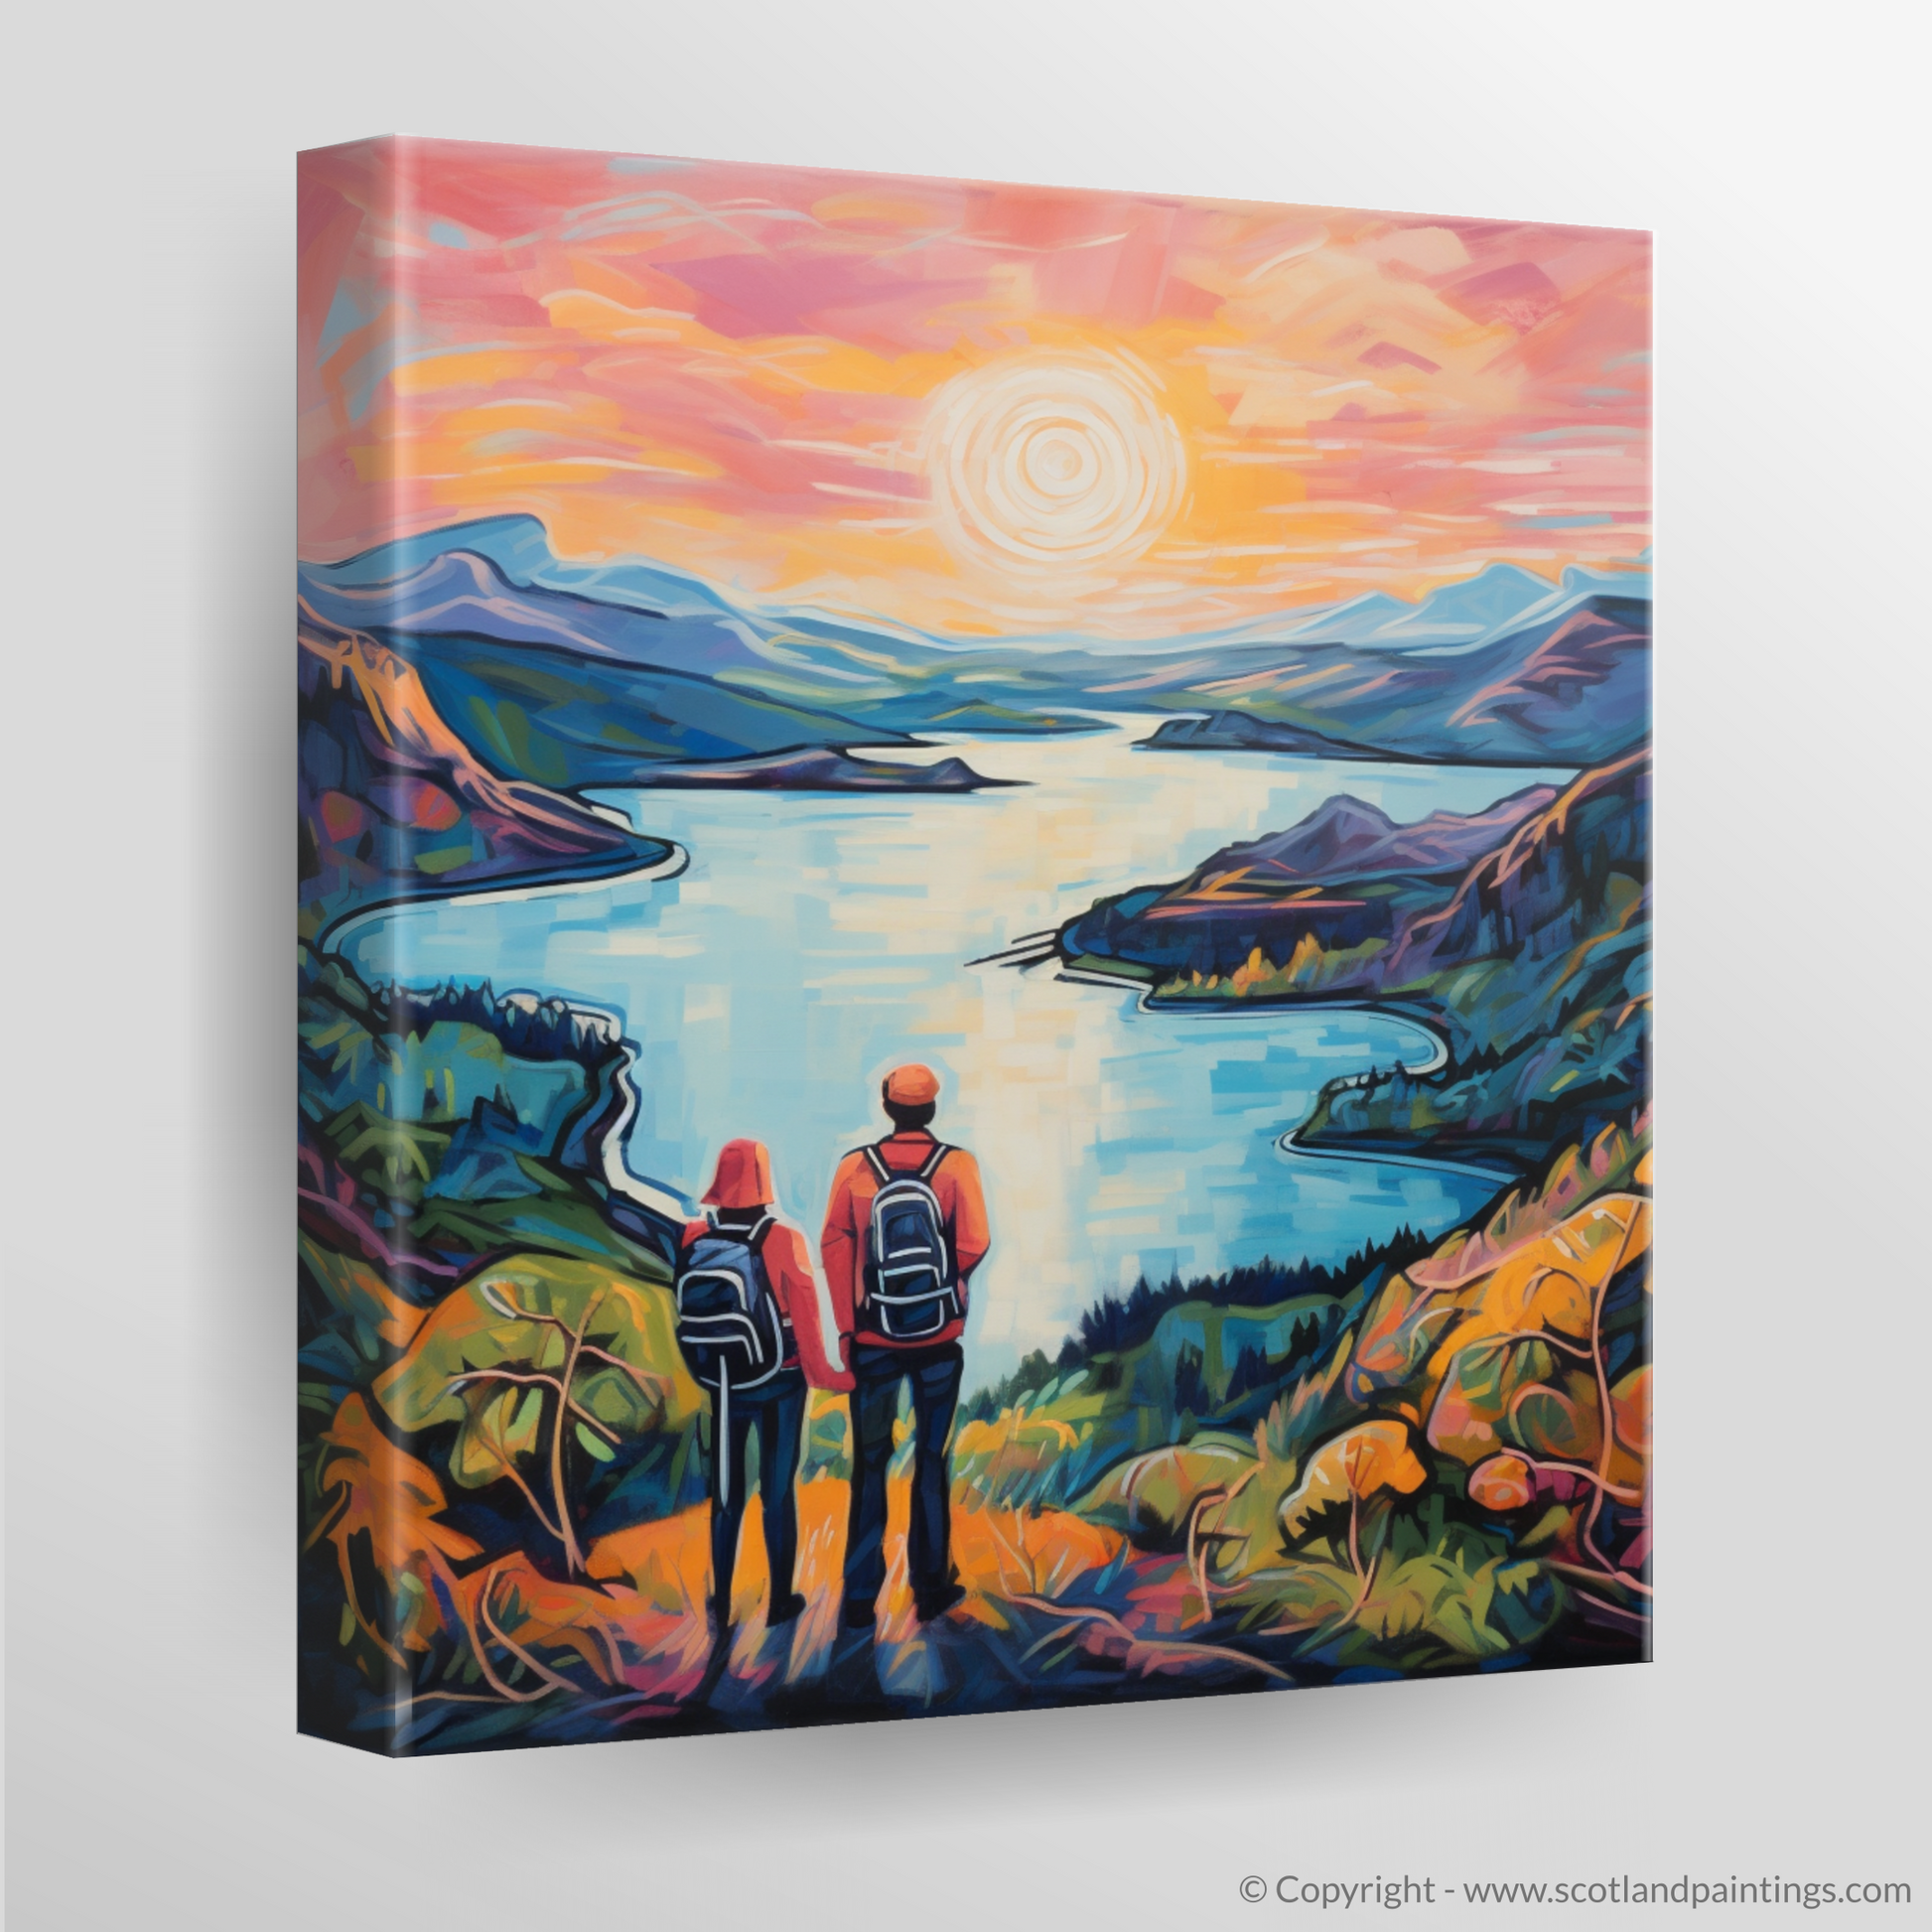 Canvas Print of Two hikers looking out on Loch Lomond